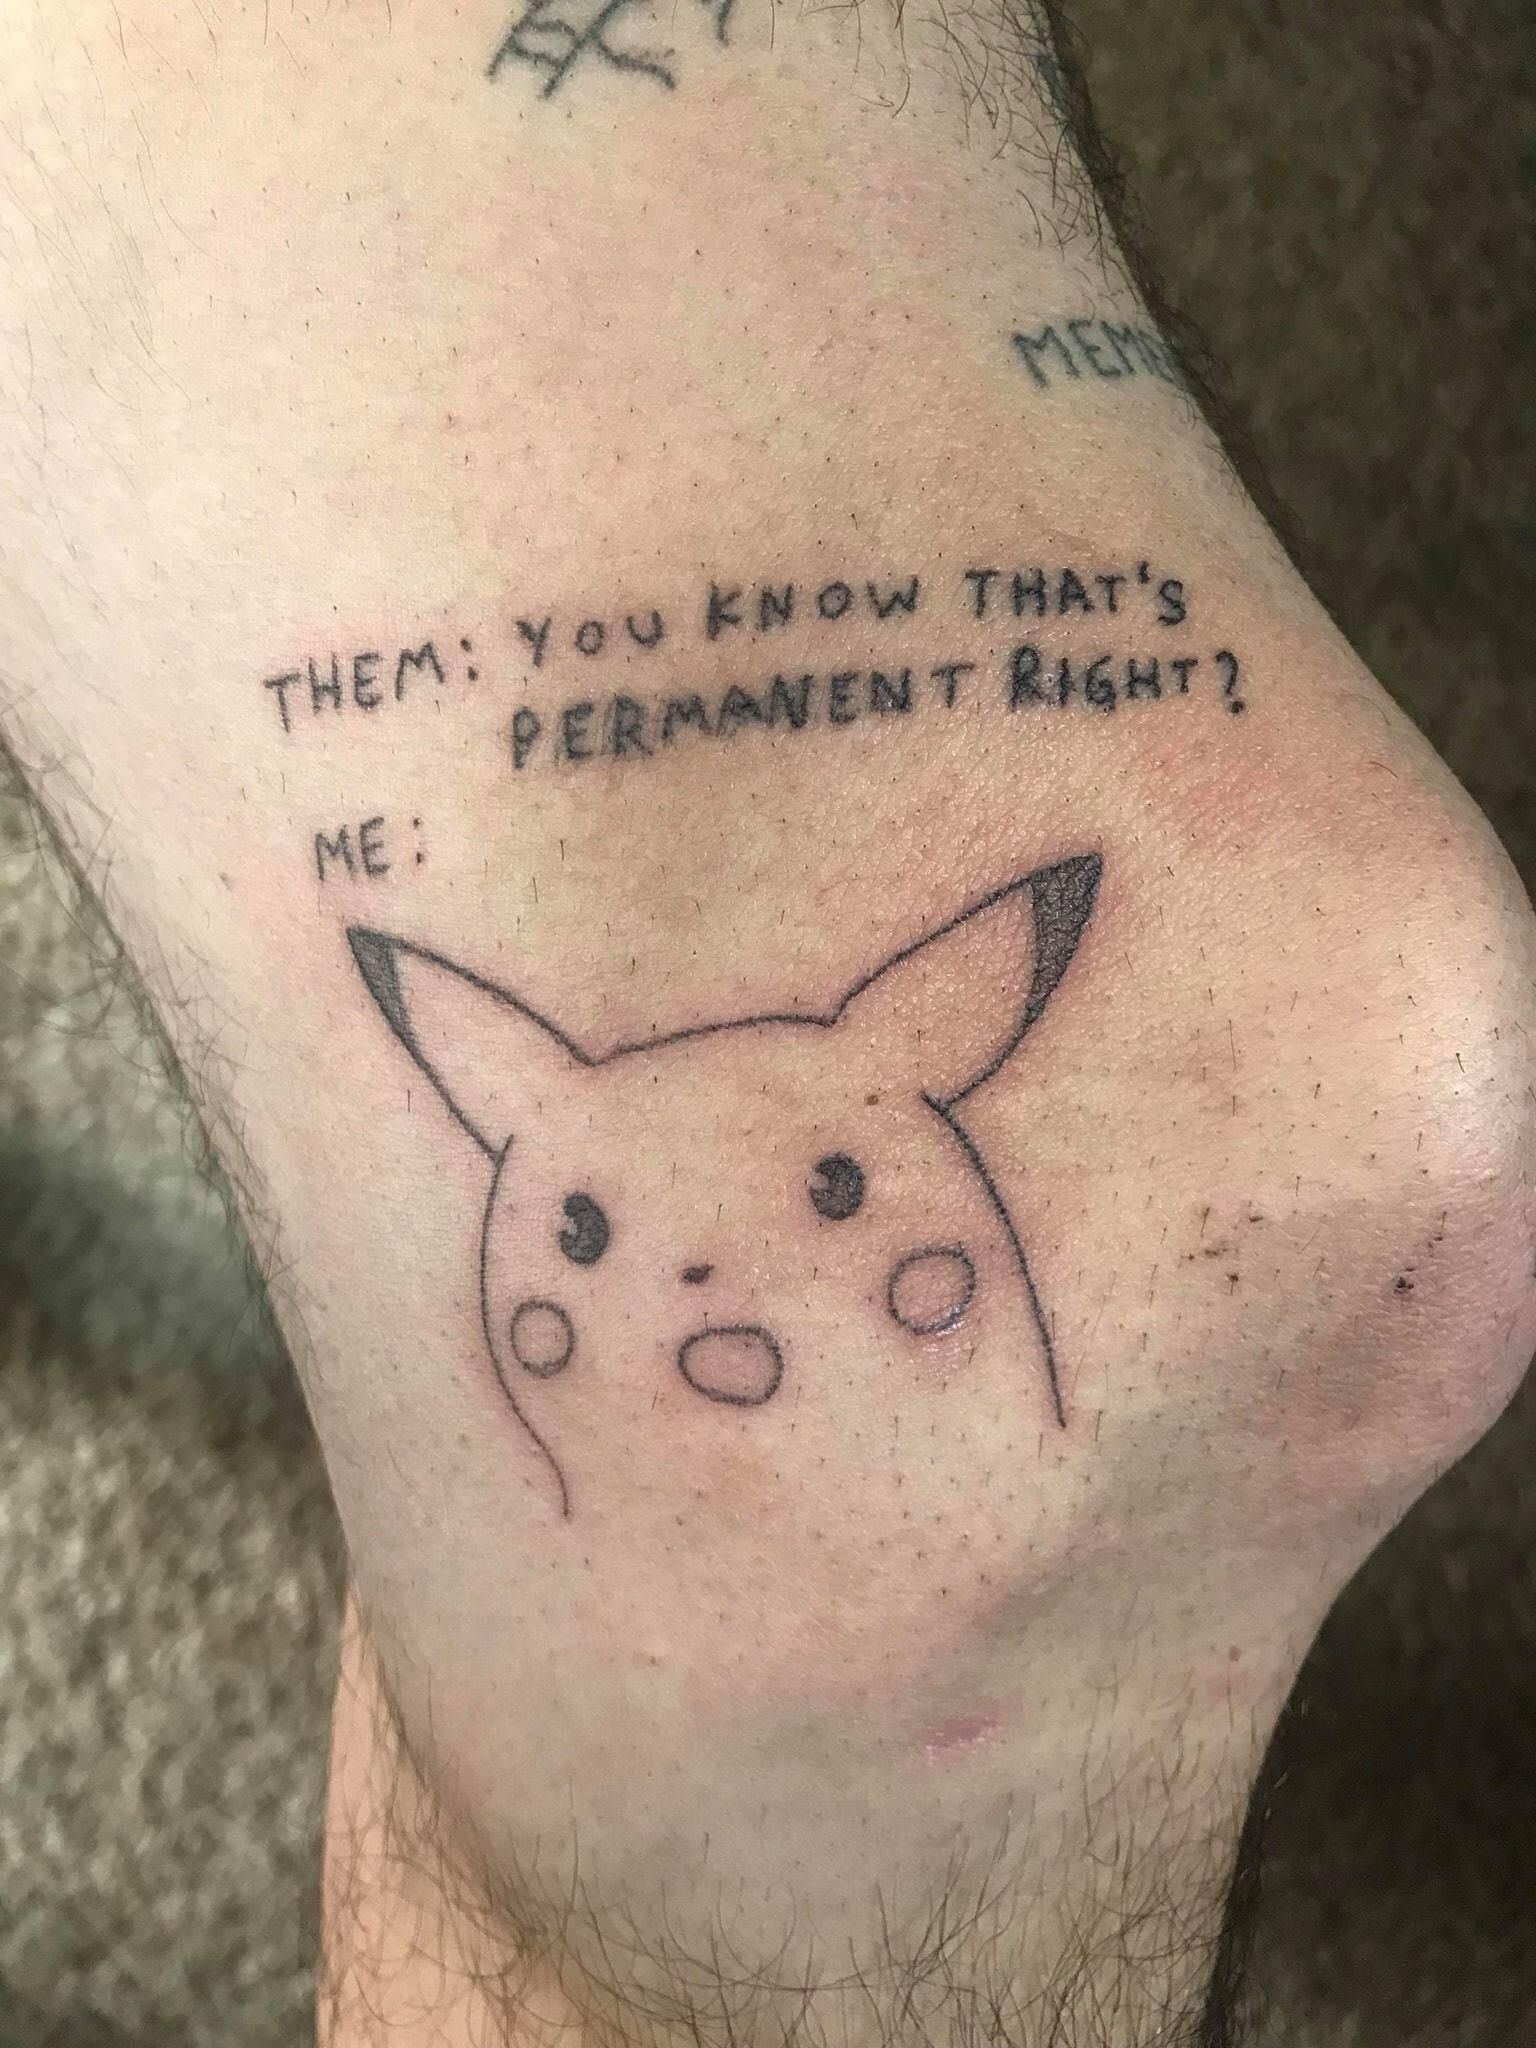 Tattoos are permanent